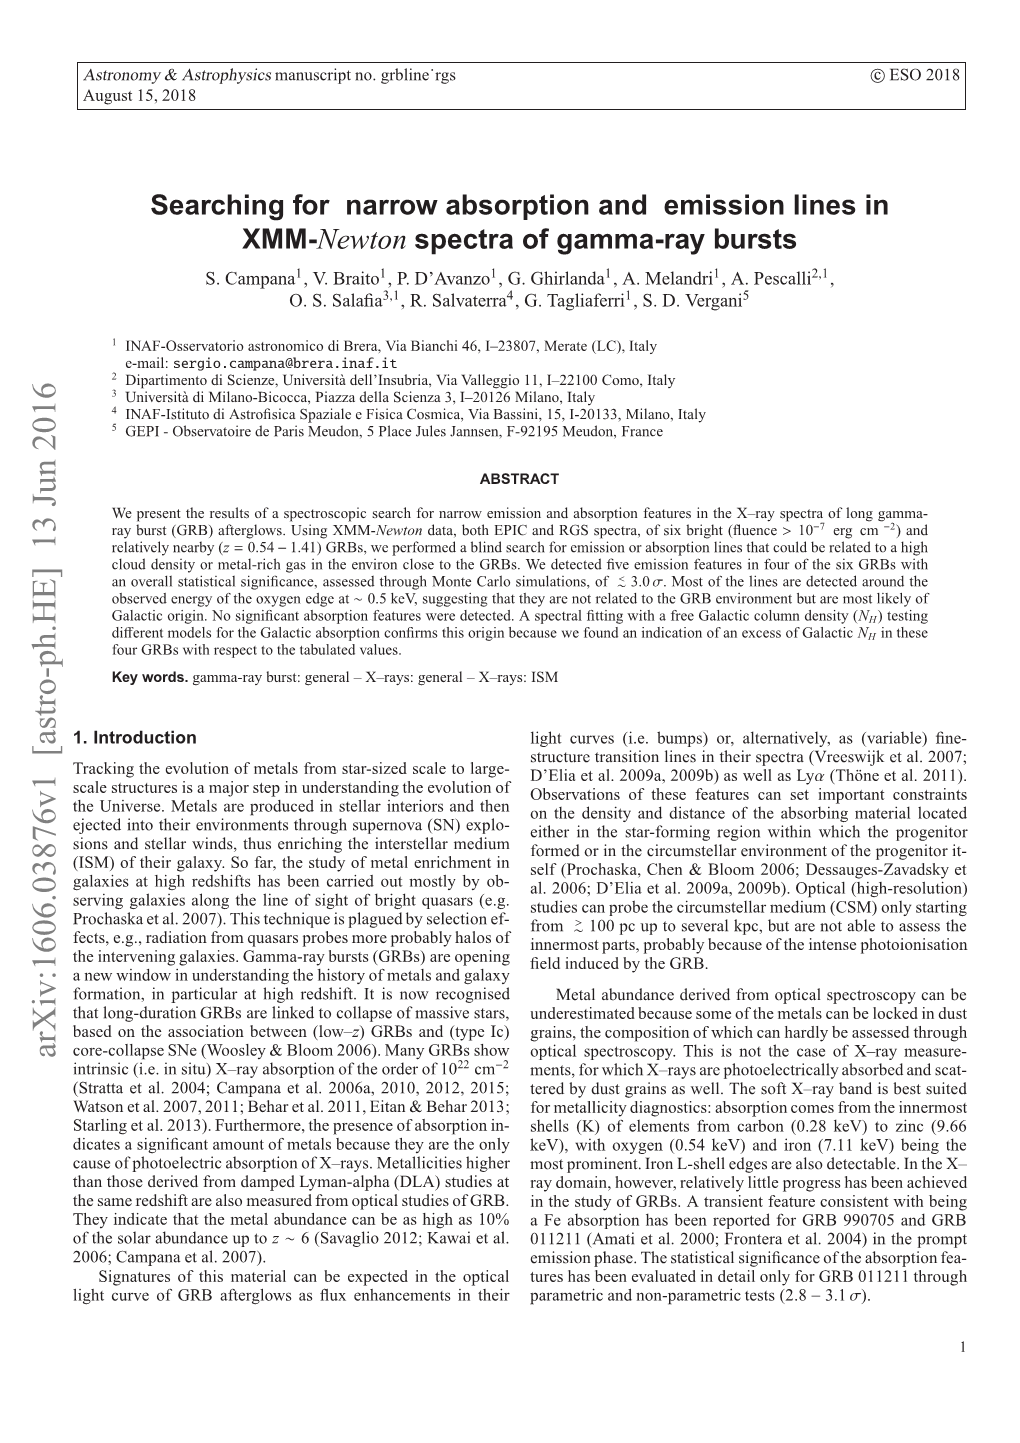 Searching for Narrow Absorption and Emission Lines in XMM-Newton Spectra of Gamma-Ray Bursts